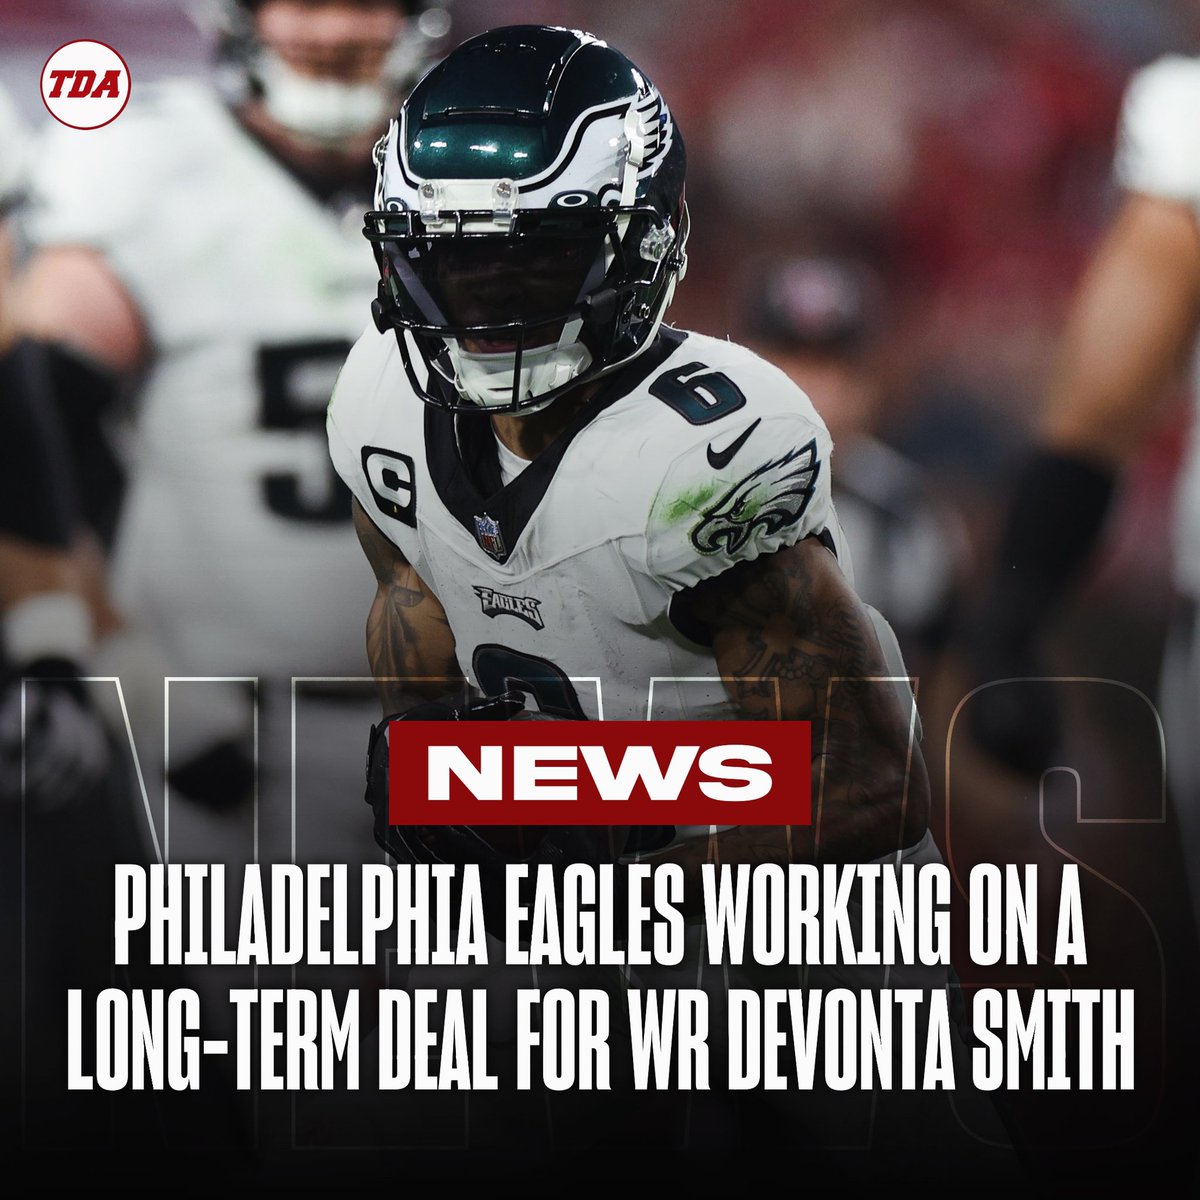 The Eagles are working to bring back DeVonta Smith 🔜